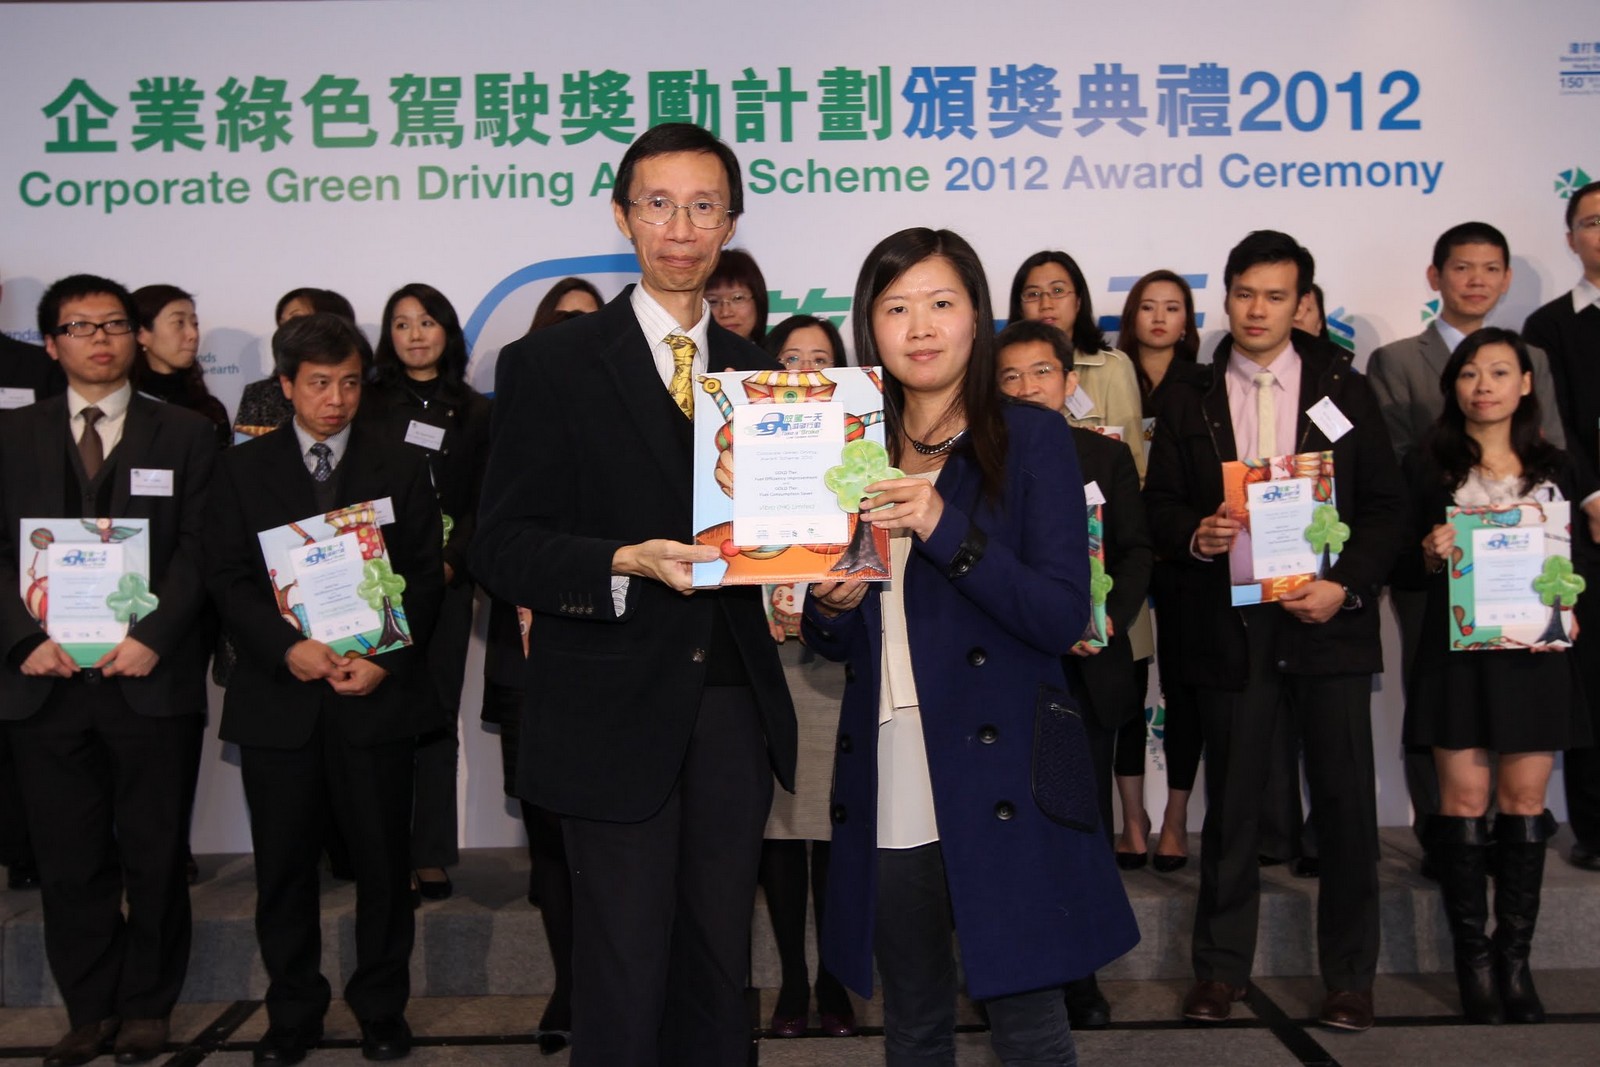 Ms. Yanney Leung, Senior Mechanical Engineer, reprsents Vibro (H.K.) Ltd. to receive the Gold Award for Fuel Efficiency Improvement and the Gold Award for Fuel Consumption Saver